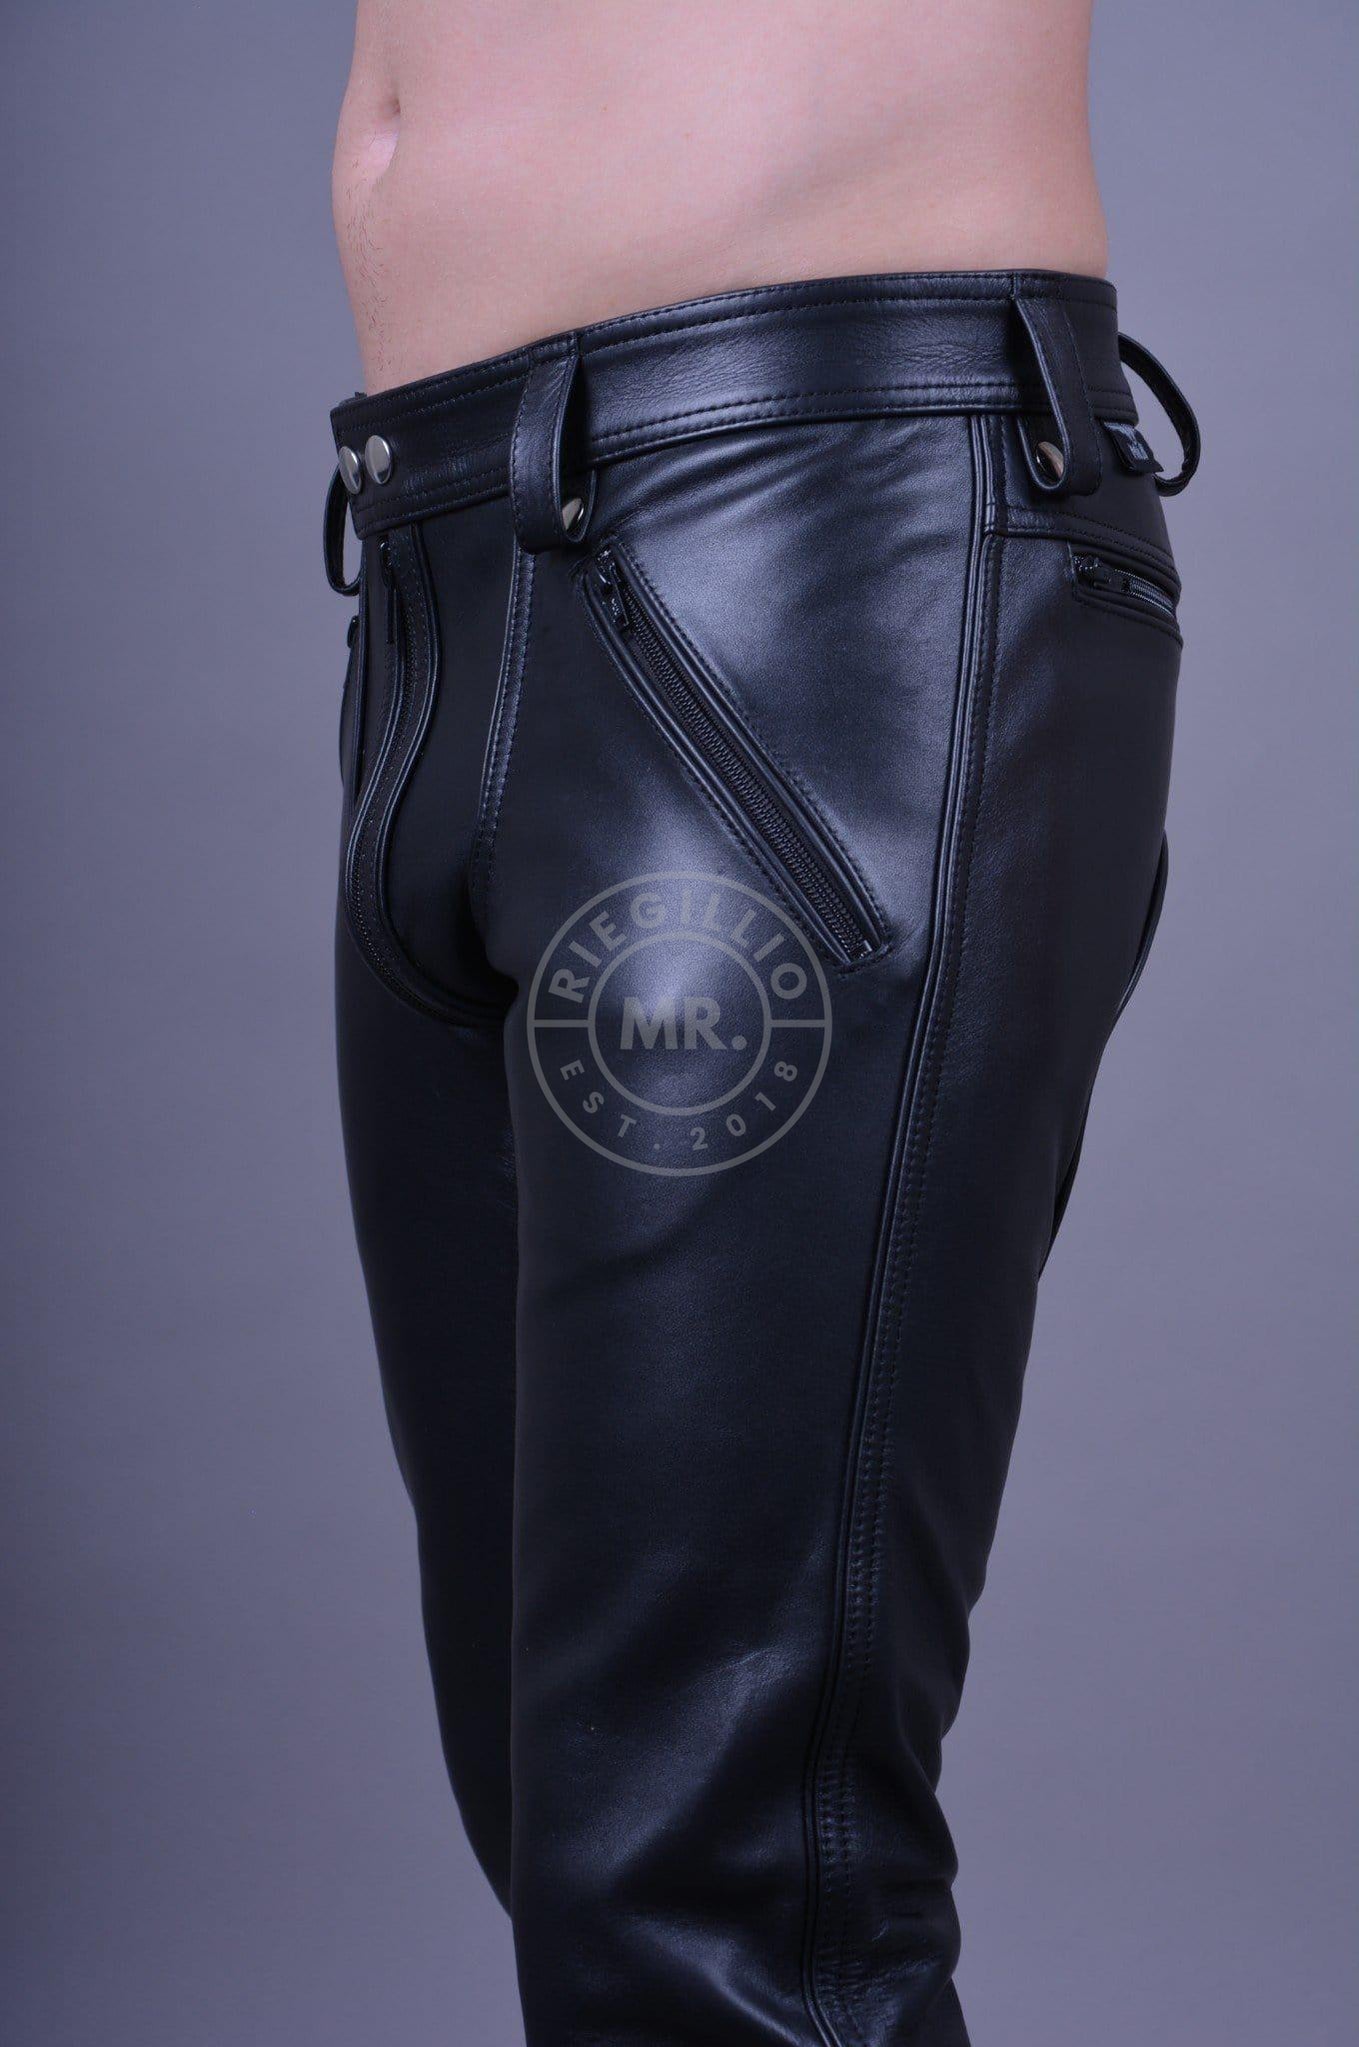 Real Leather Pants - Mr Leather Shop